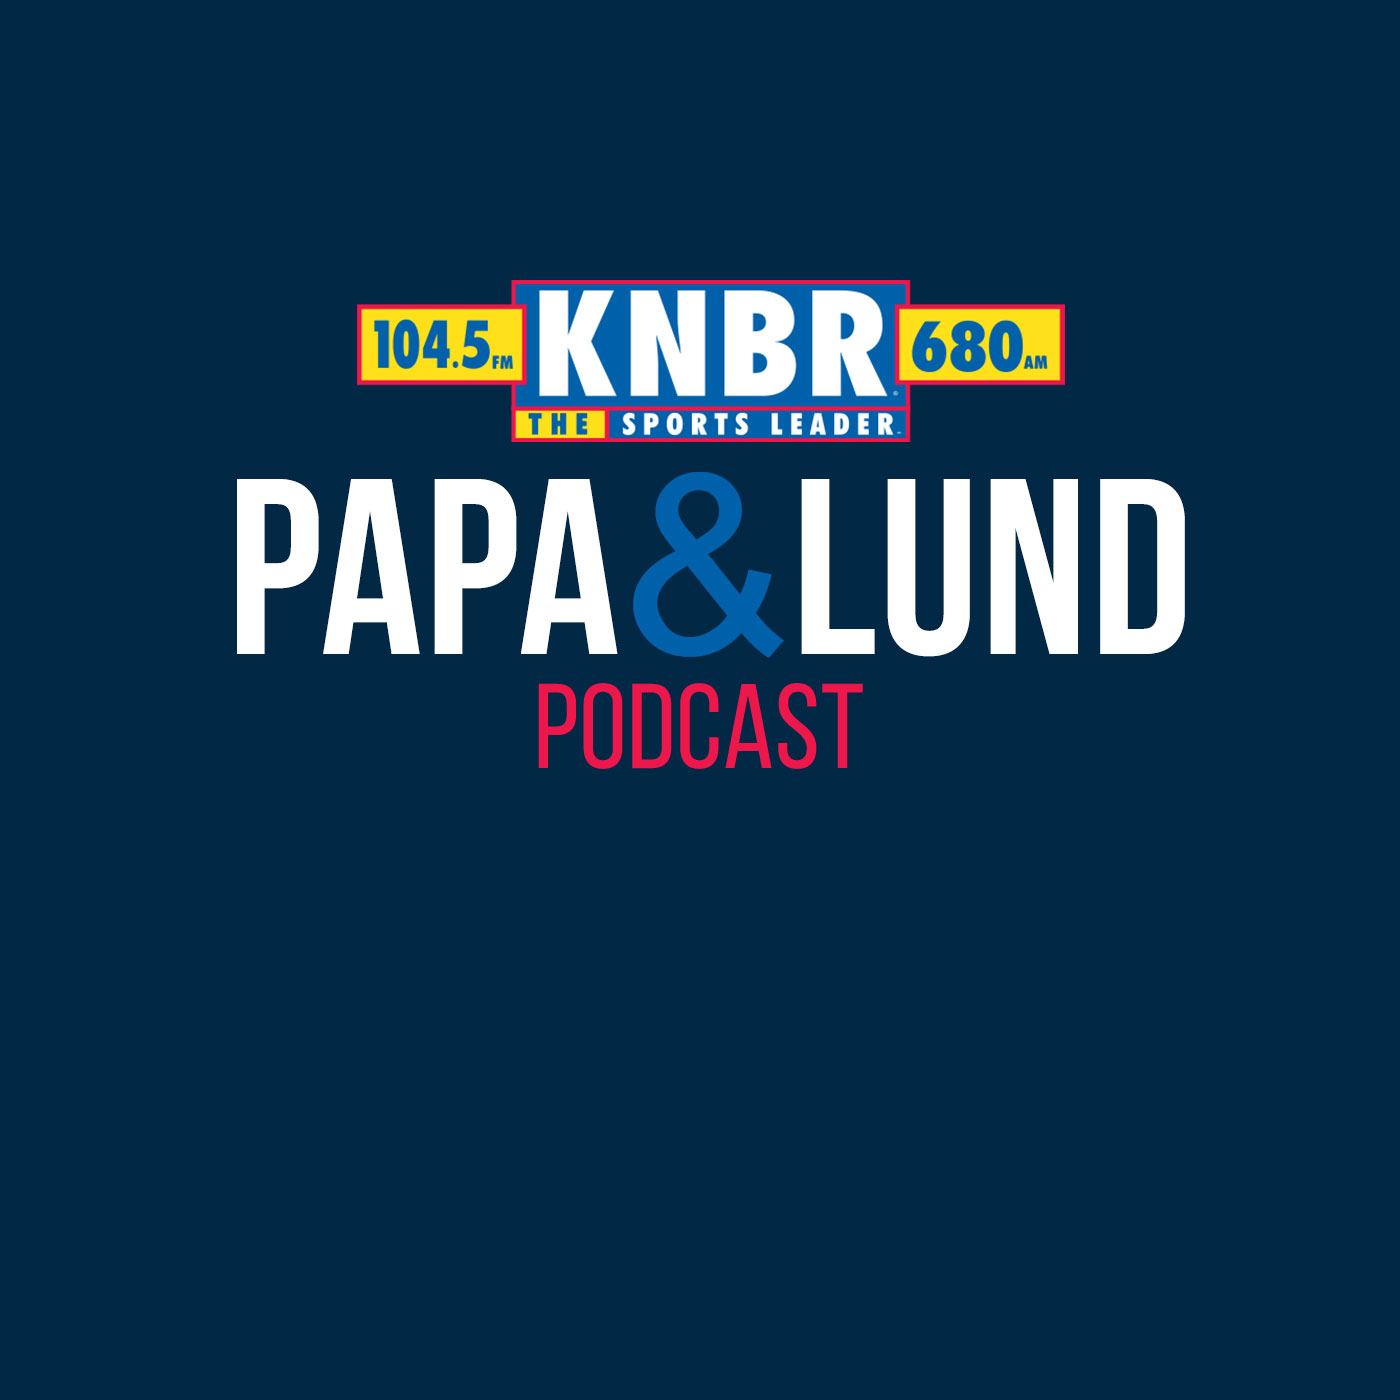 2-22 Mike Sando joins Papa & Lund to discuss the 49ers needs this offseason as well as how they address their vacancy with their Defensive Coordinator